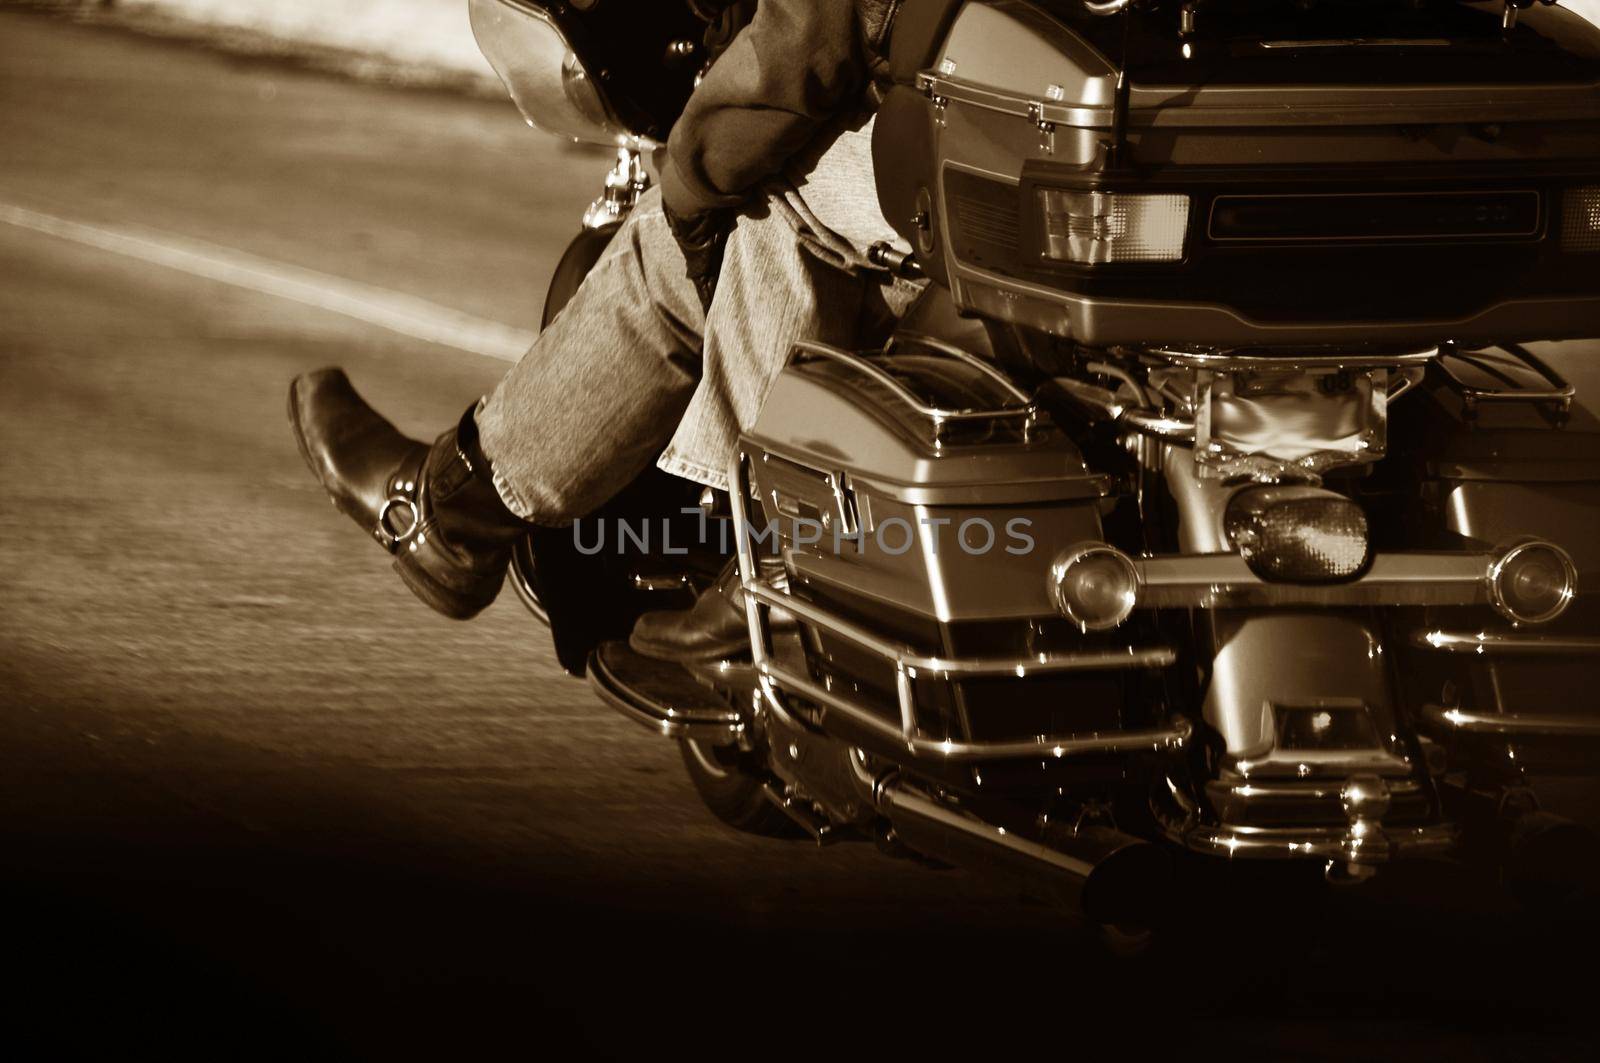 Couple Bikers Sepia Photography. Couples on the Motorbike  - Chopper Riding Down the Highway.